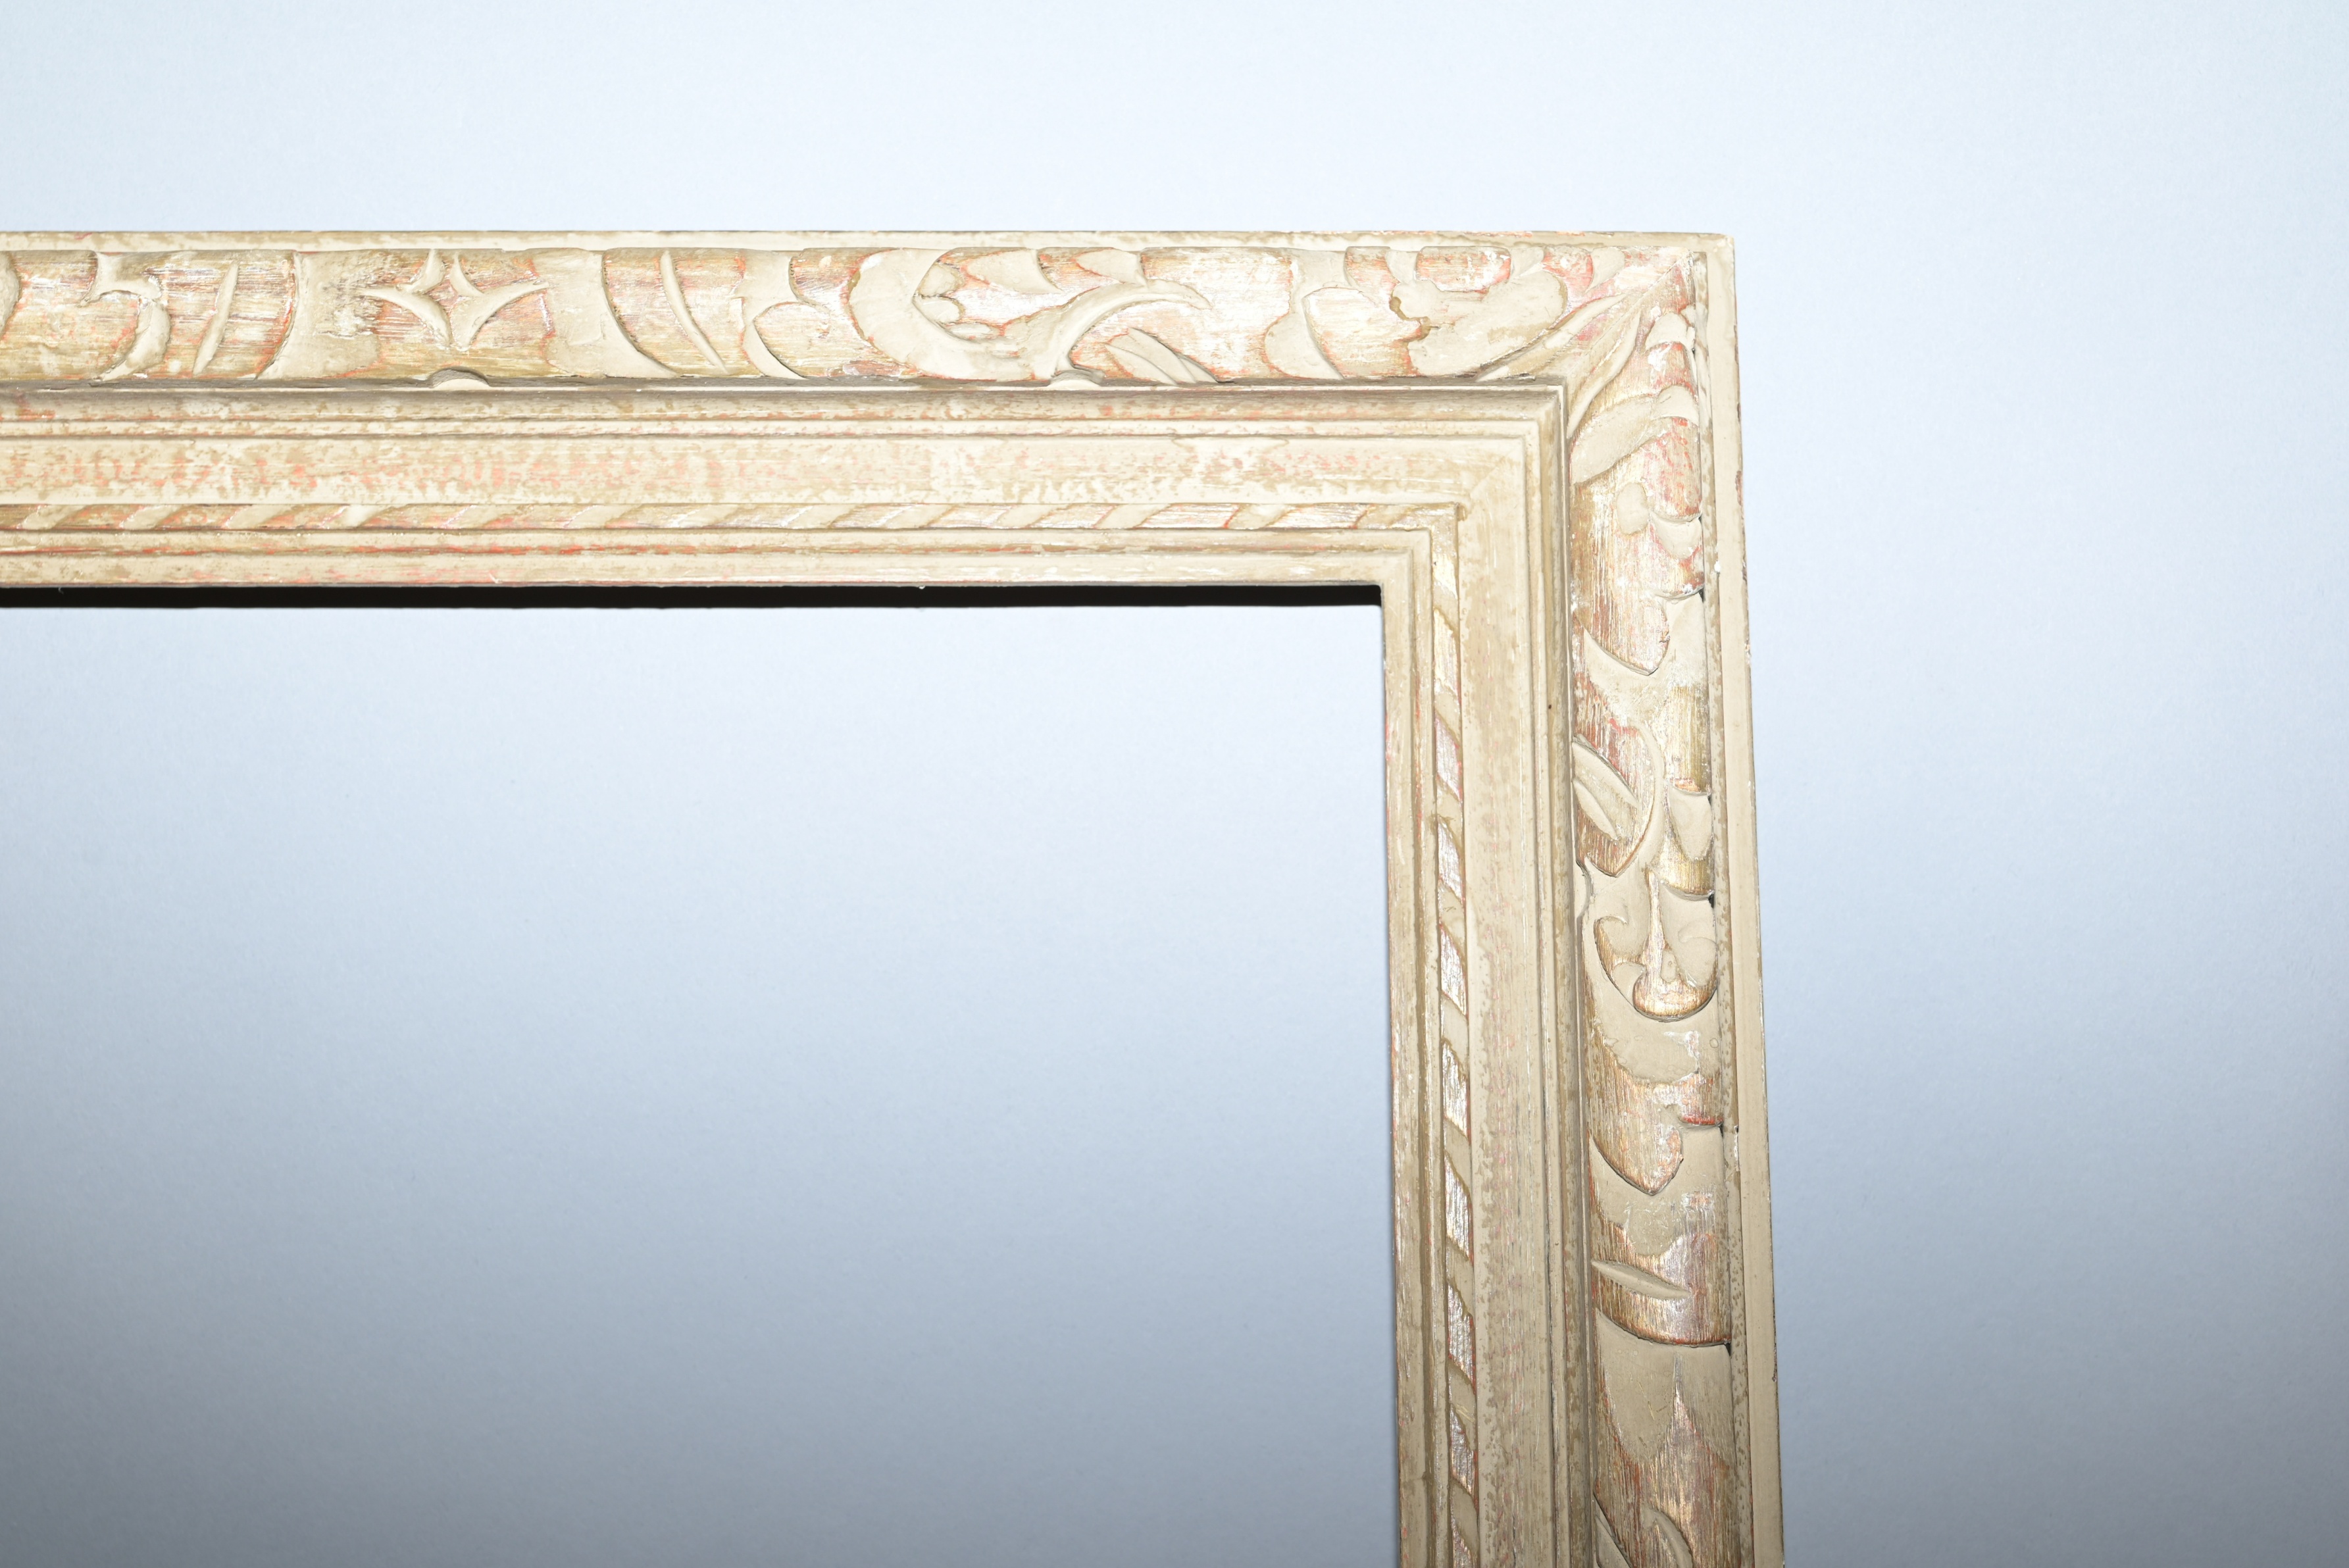 American 1950's Carved Frame - 21 1/8 x 17 1/8 - Image 3 of 7